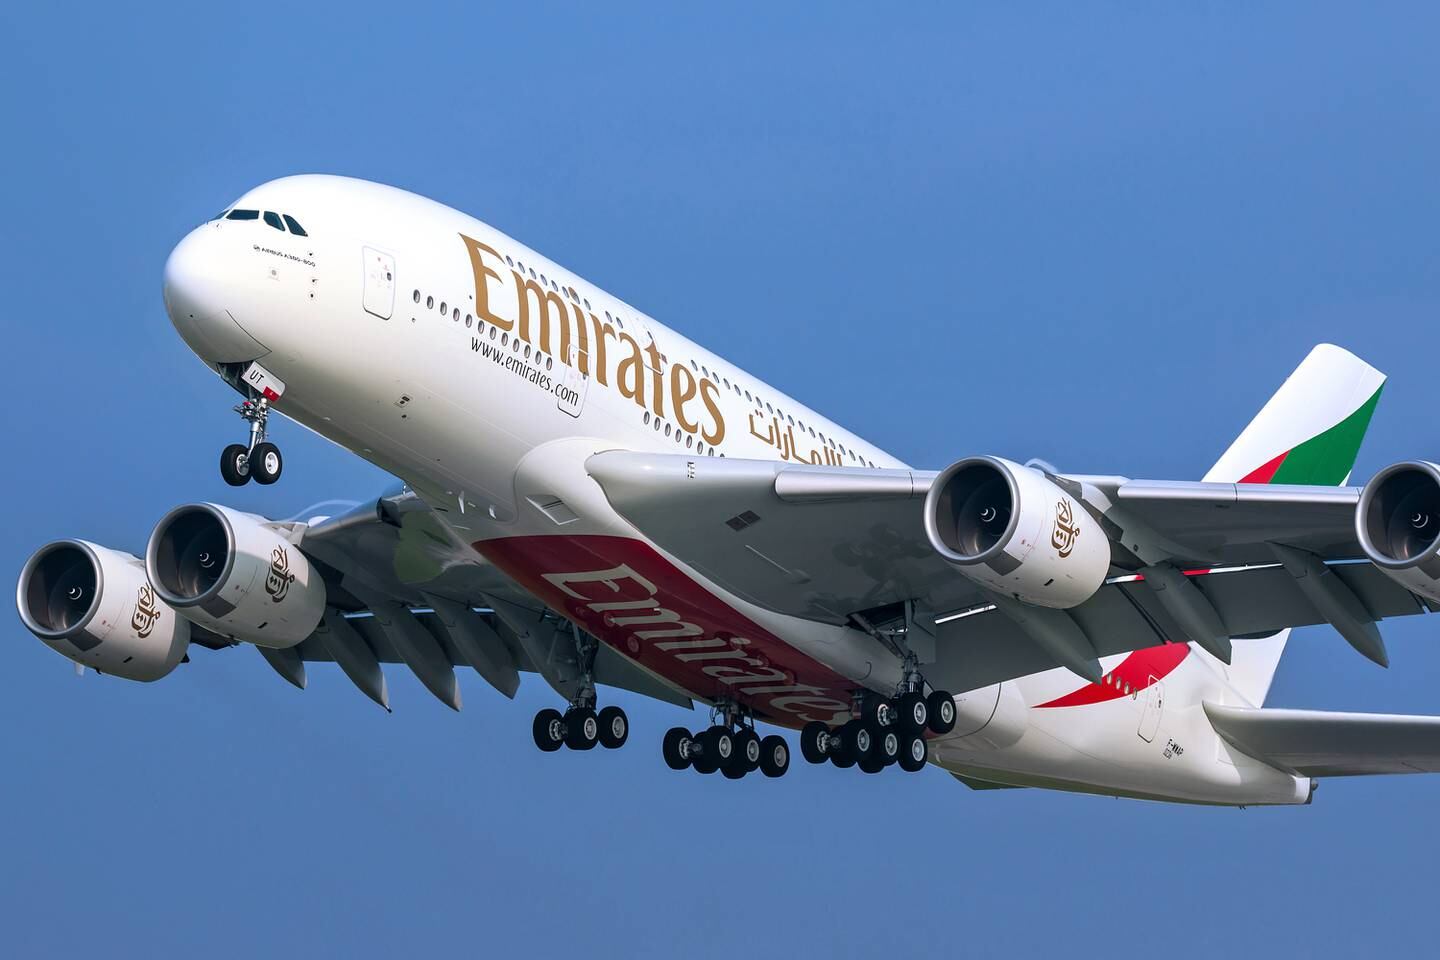 Emirates is scaling up A380 operations to meet rising travel demand. Photo: Emirates